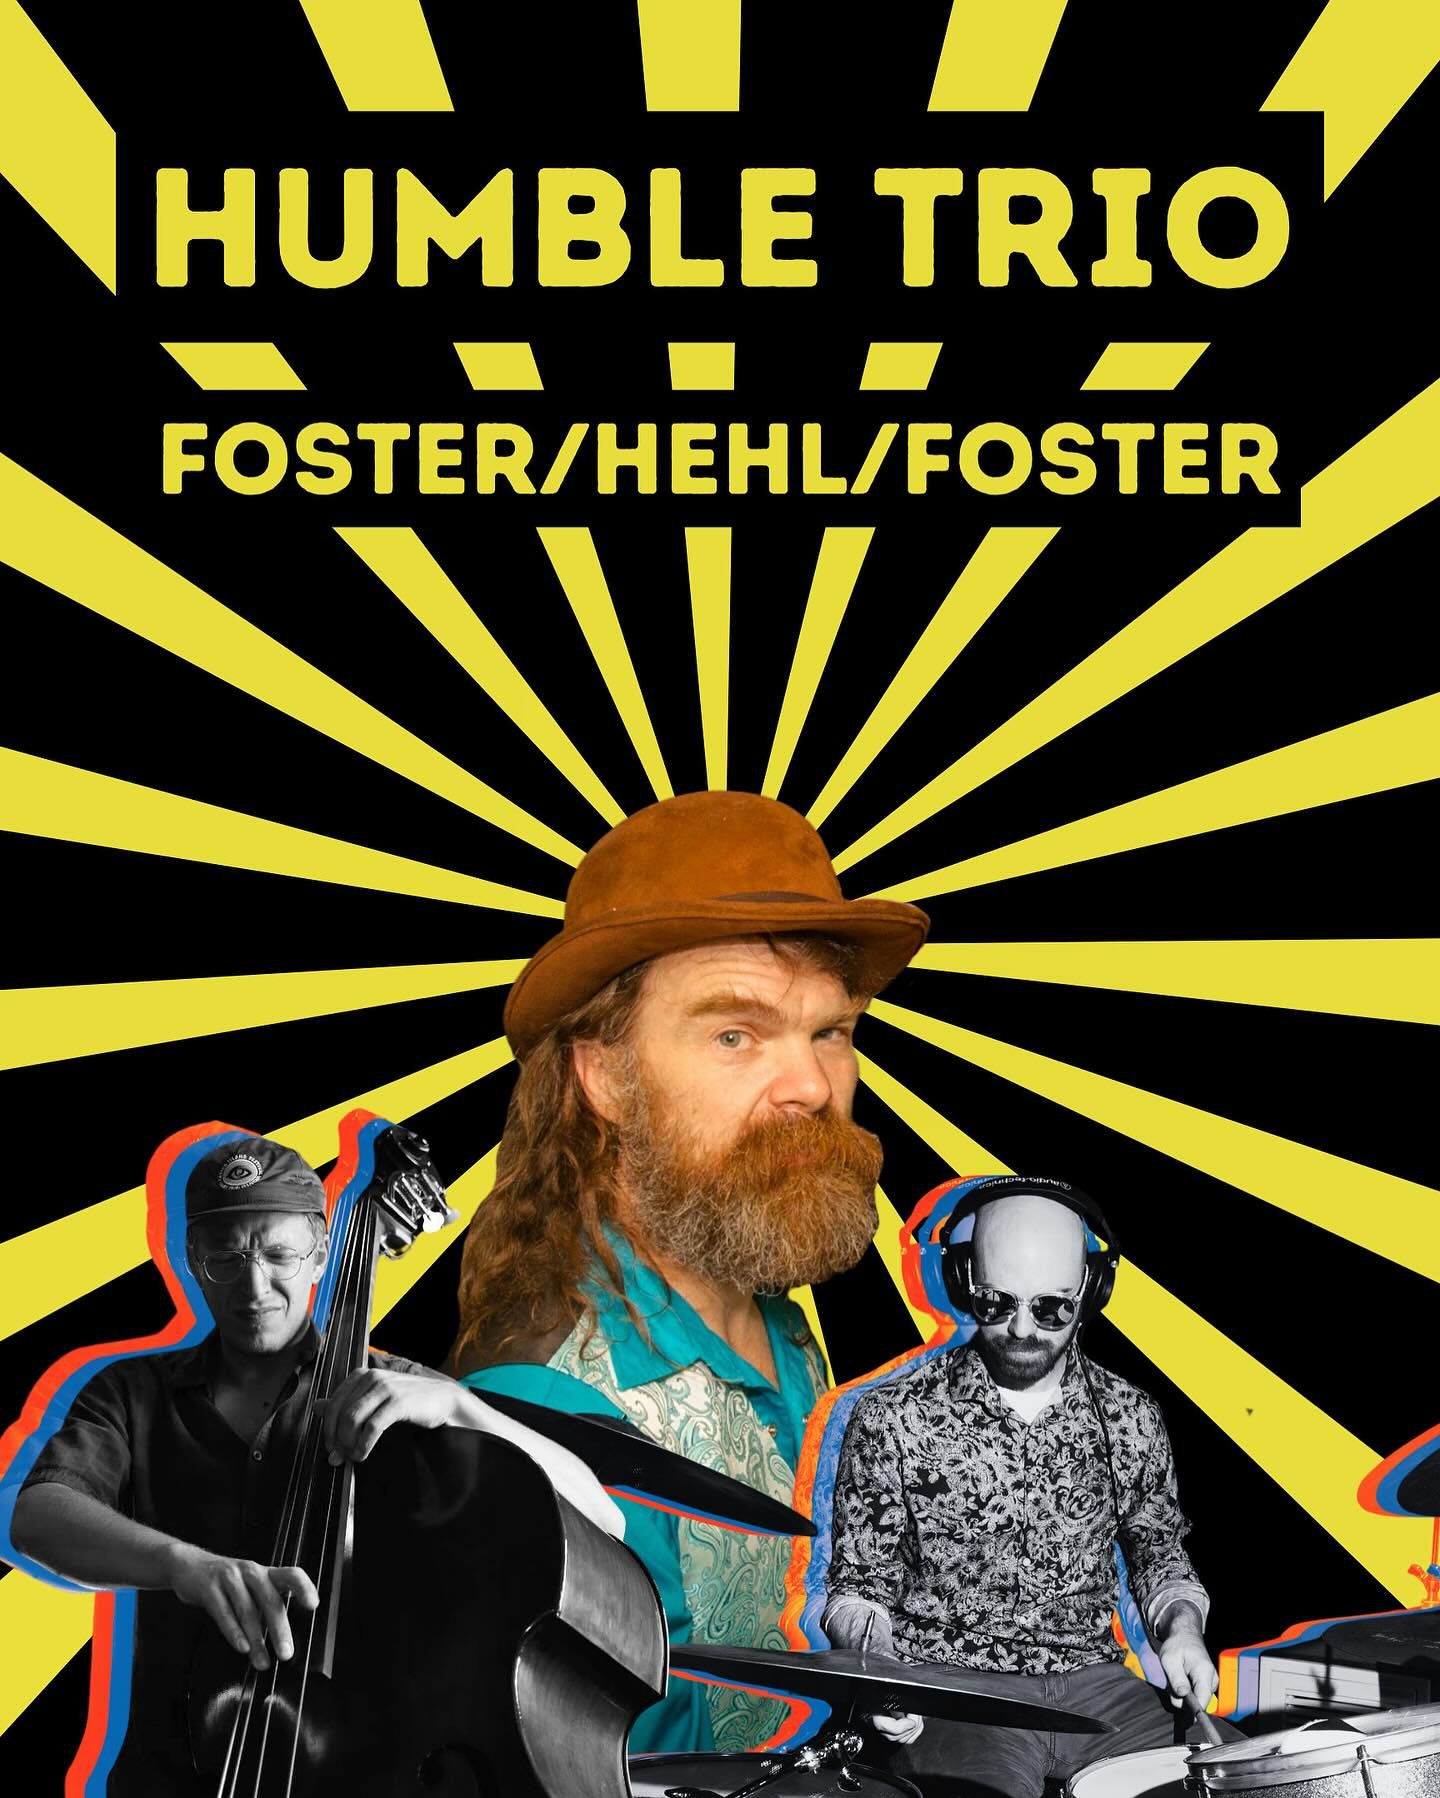 Come get some sunshine with the Humble Trio at 6pm! These guys really know how to throw down!